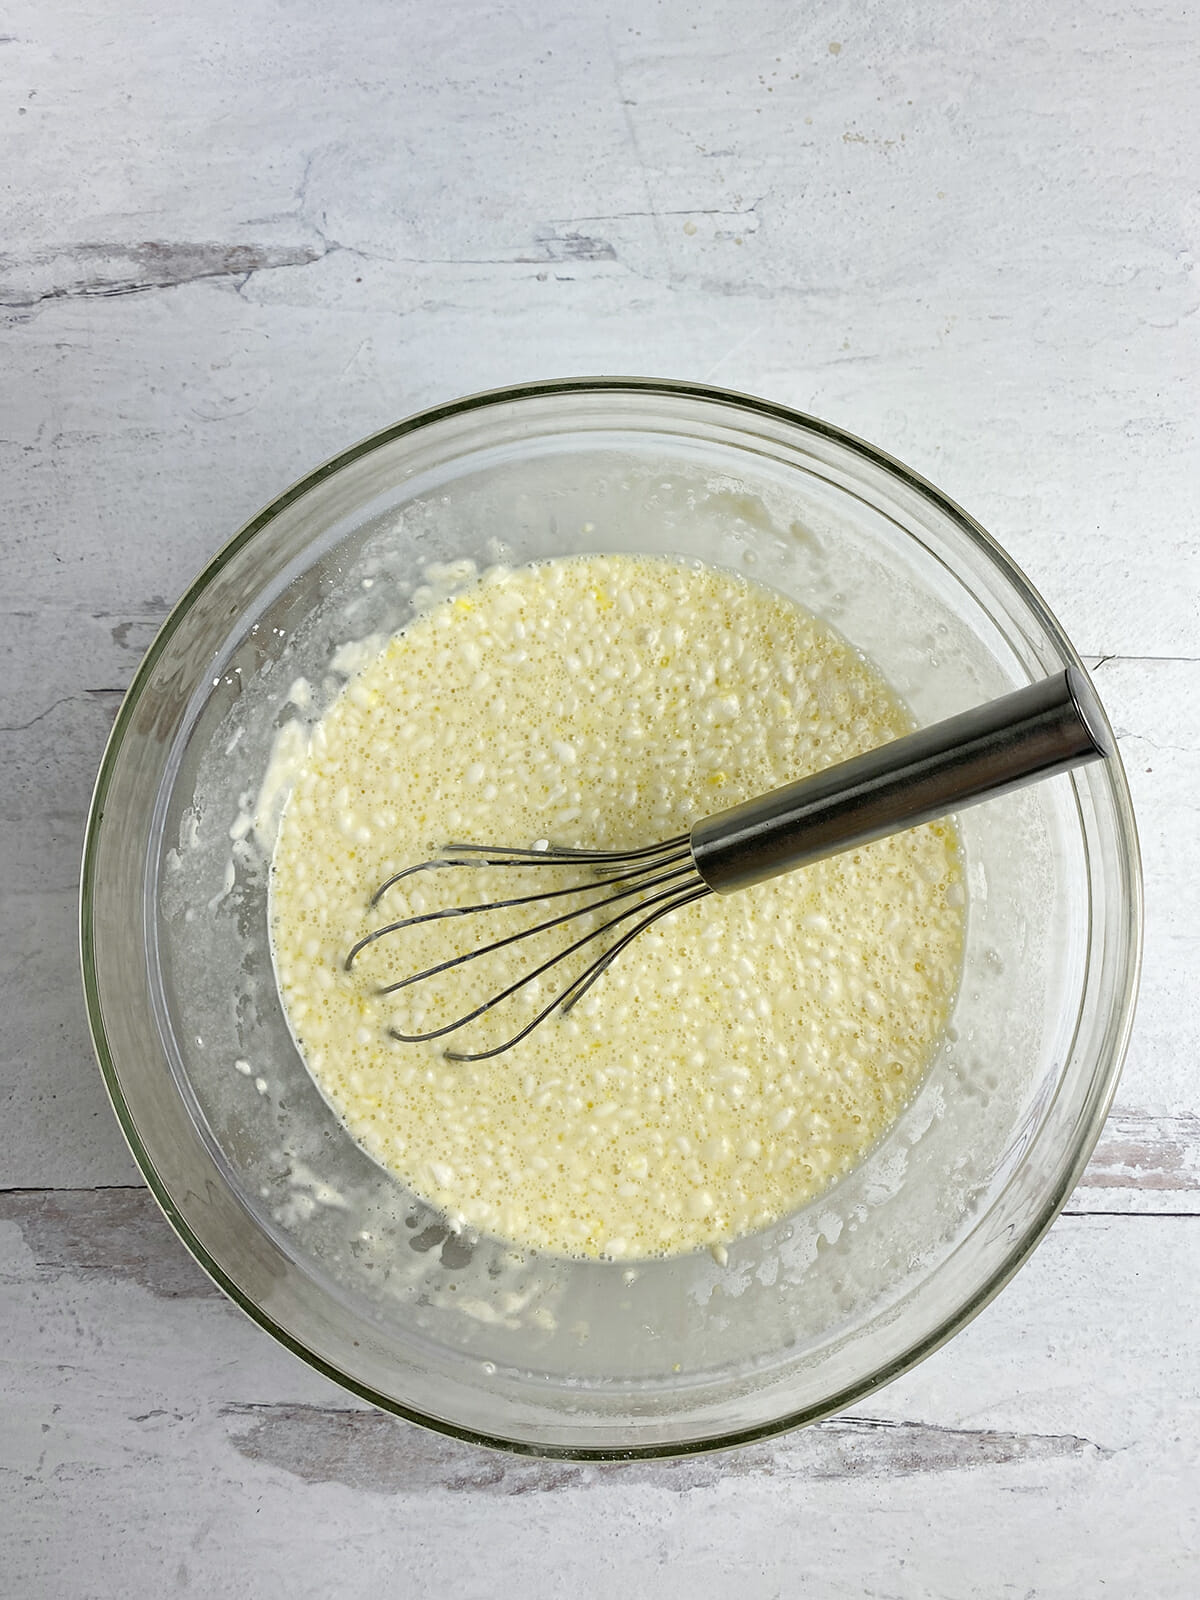 Whisked eggs, flour and butter in a mixing bowl.